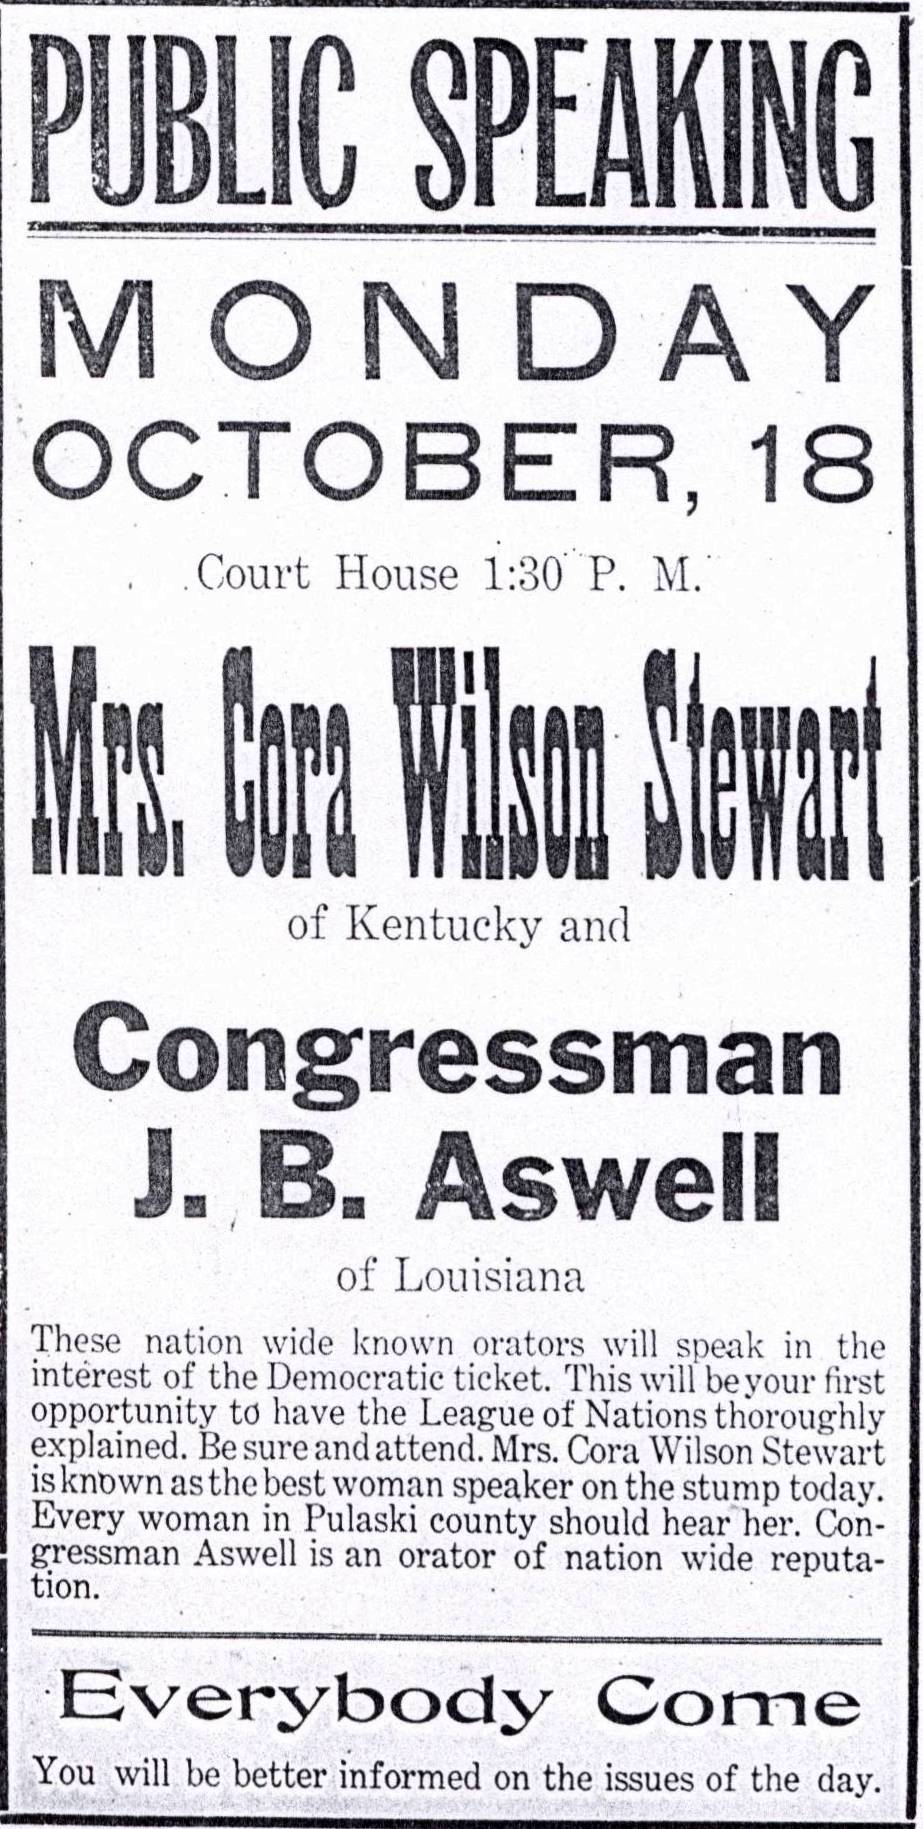 1920 Election Year ads ands Editorials in Pulaski County